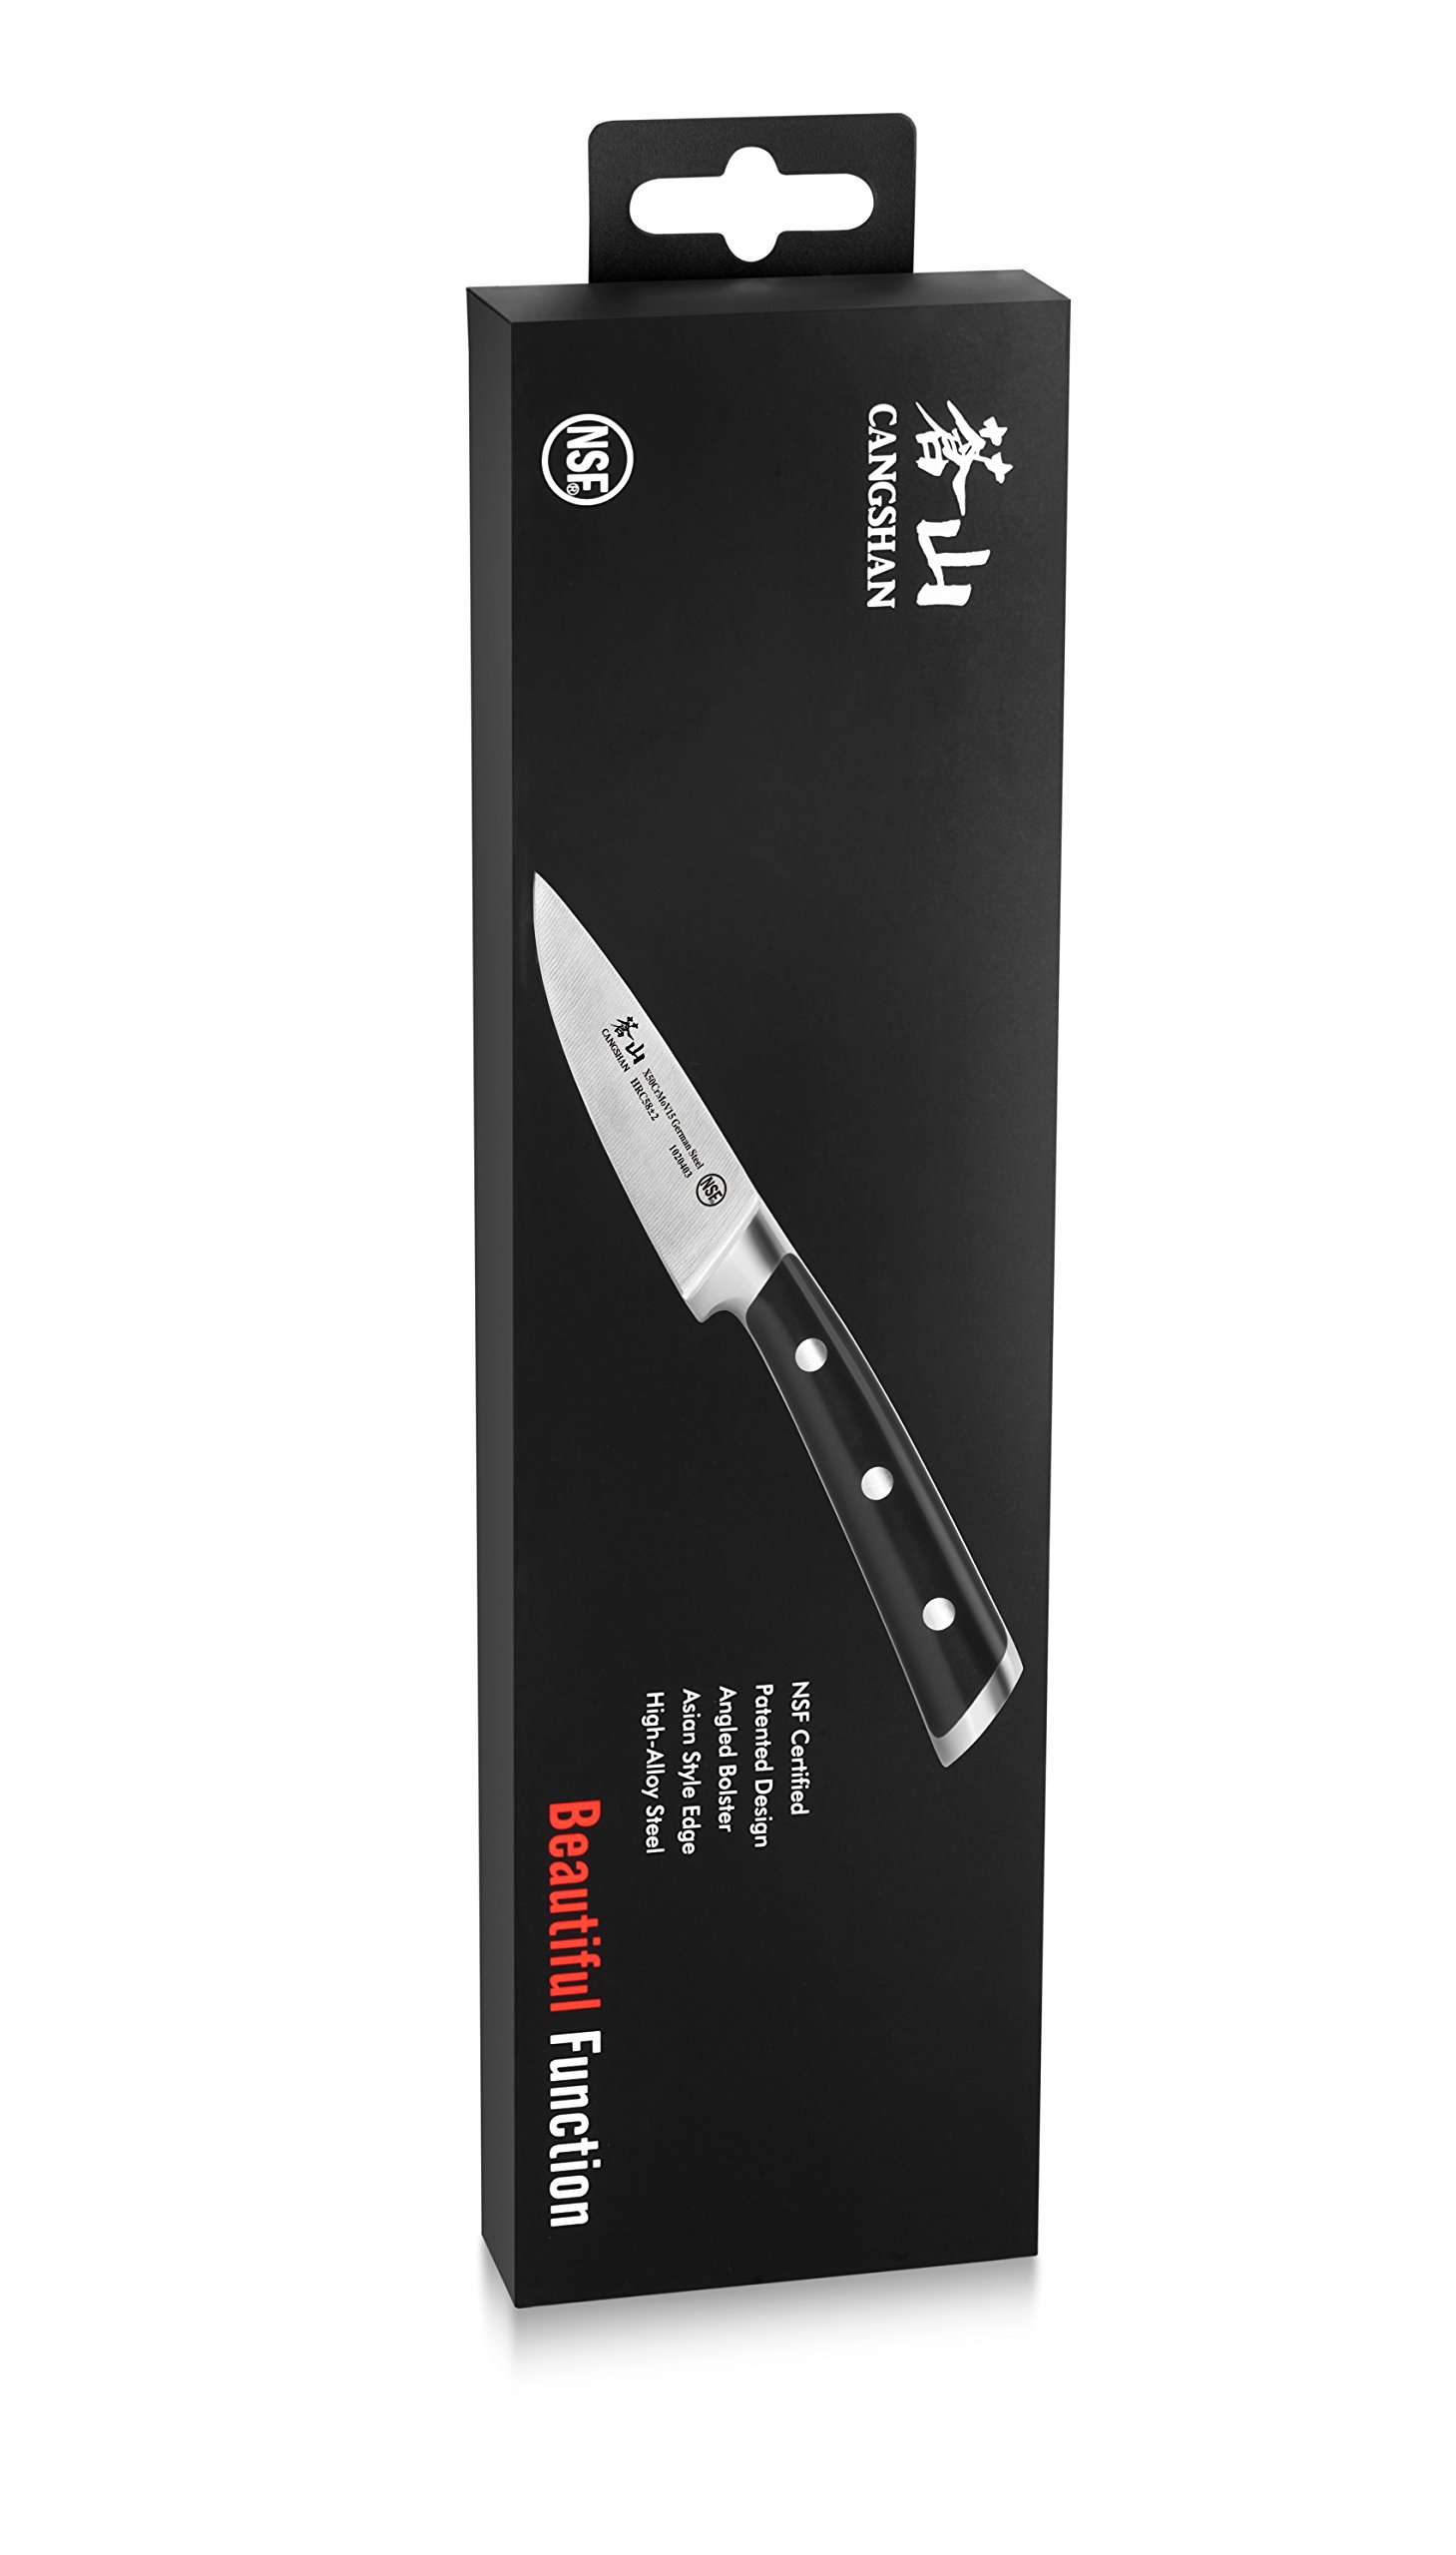 Cangshan S Series 1020403 German Steel Forged Paring Knife, 3.5-Inch Blade